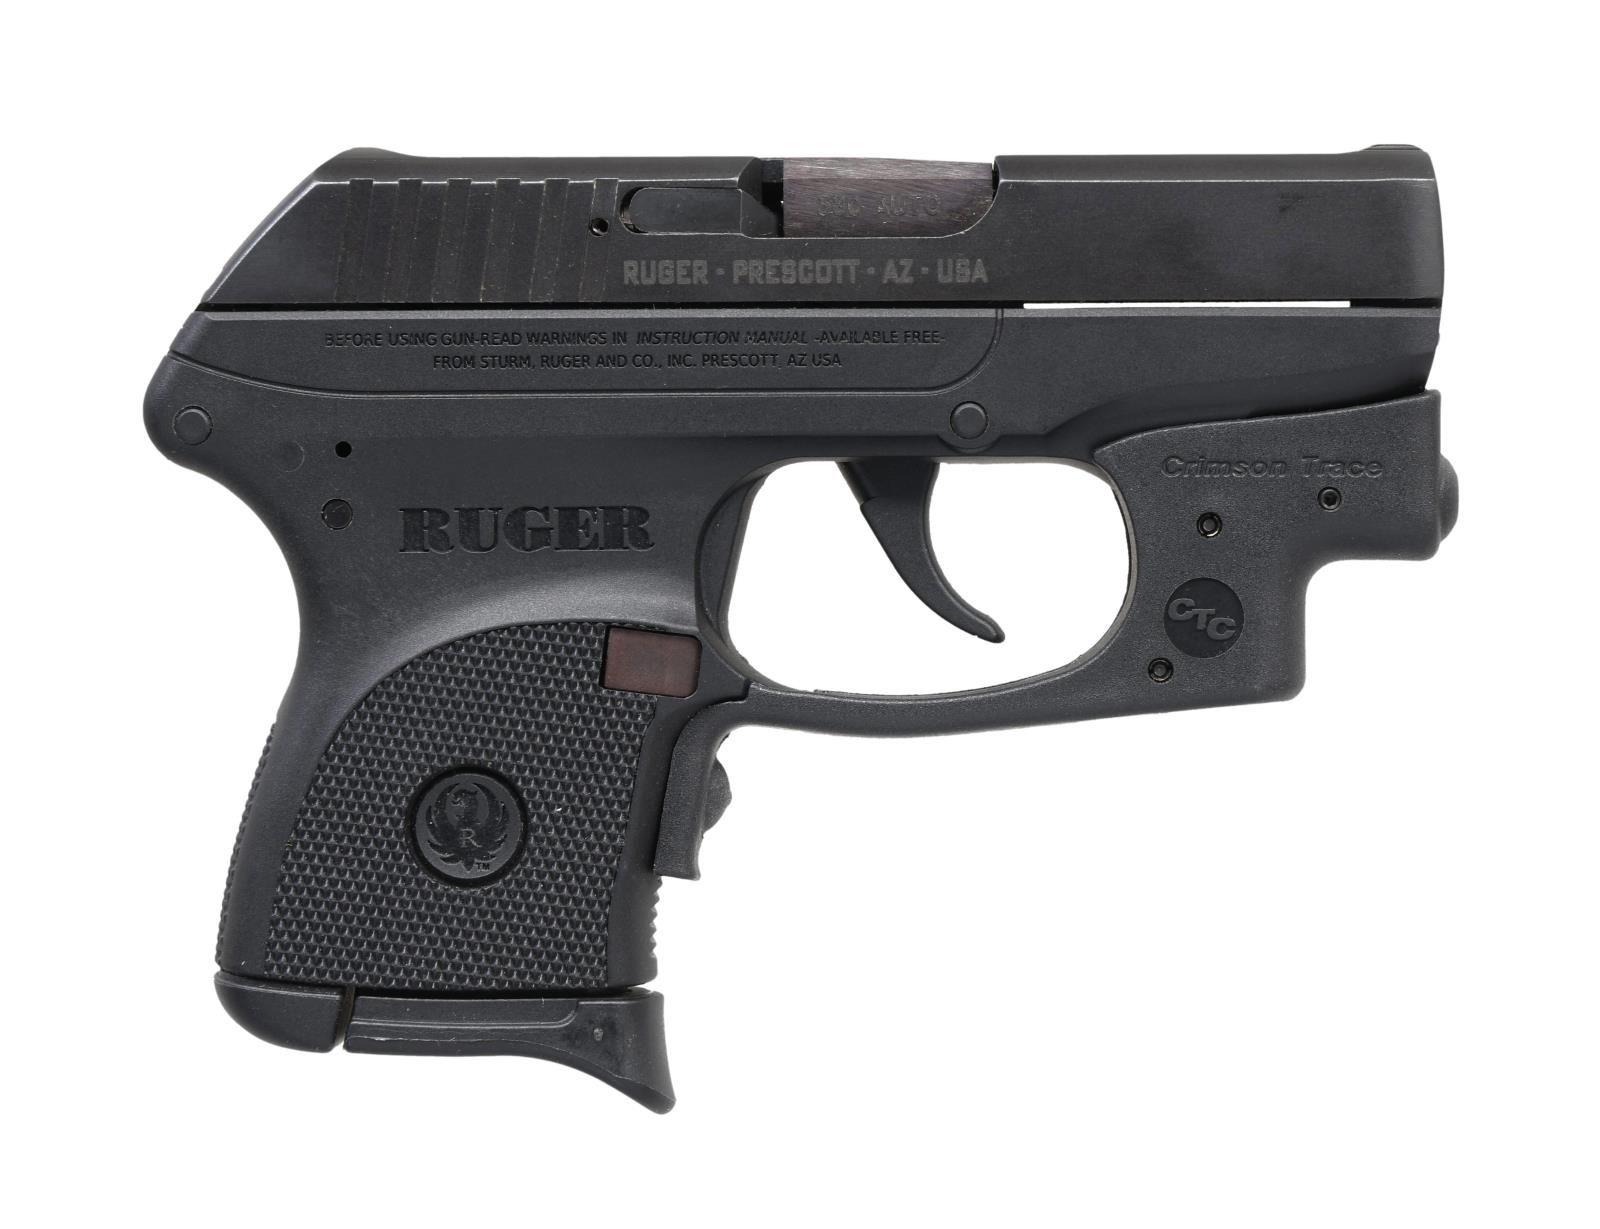 RUGER MODEL LCP SEMI-AUTO PISTOL WITH LASER SIGHT.